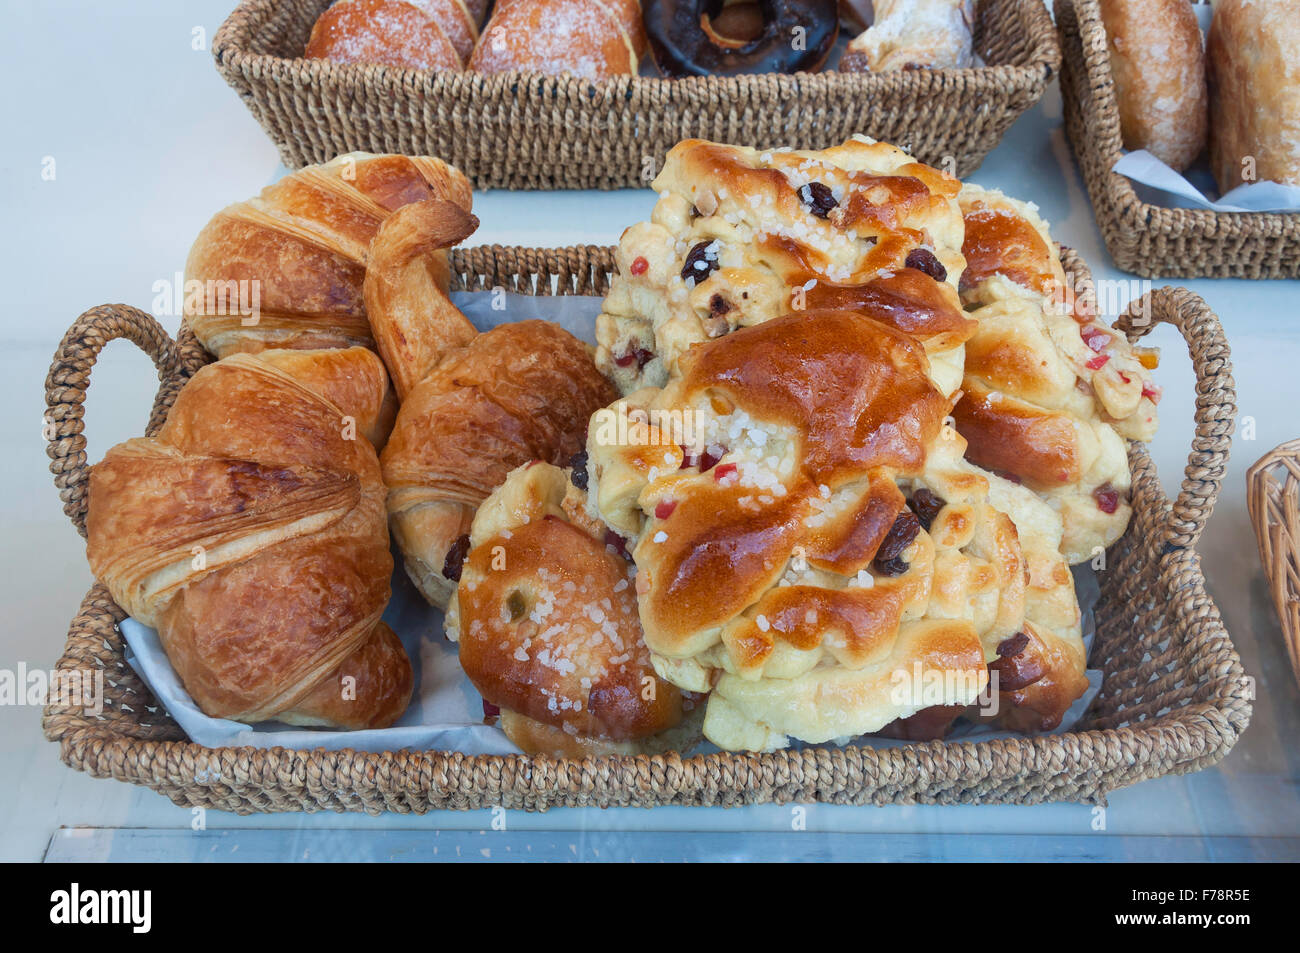 Pastries in bakery shop window, Church Street, Chalfont St Giles Buckinghamshire, England, United Kingdom Stock Photo